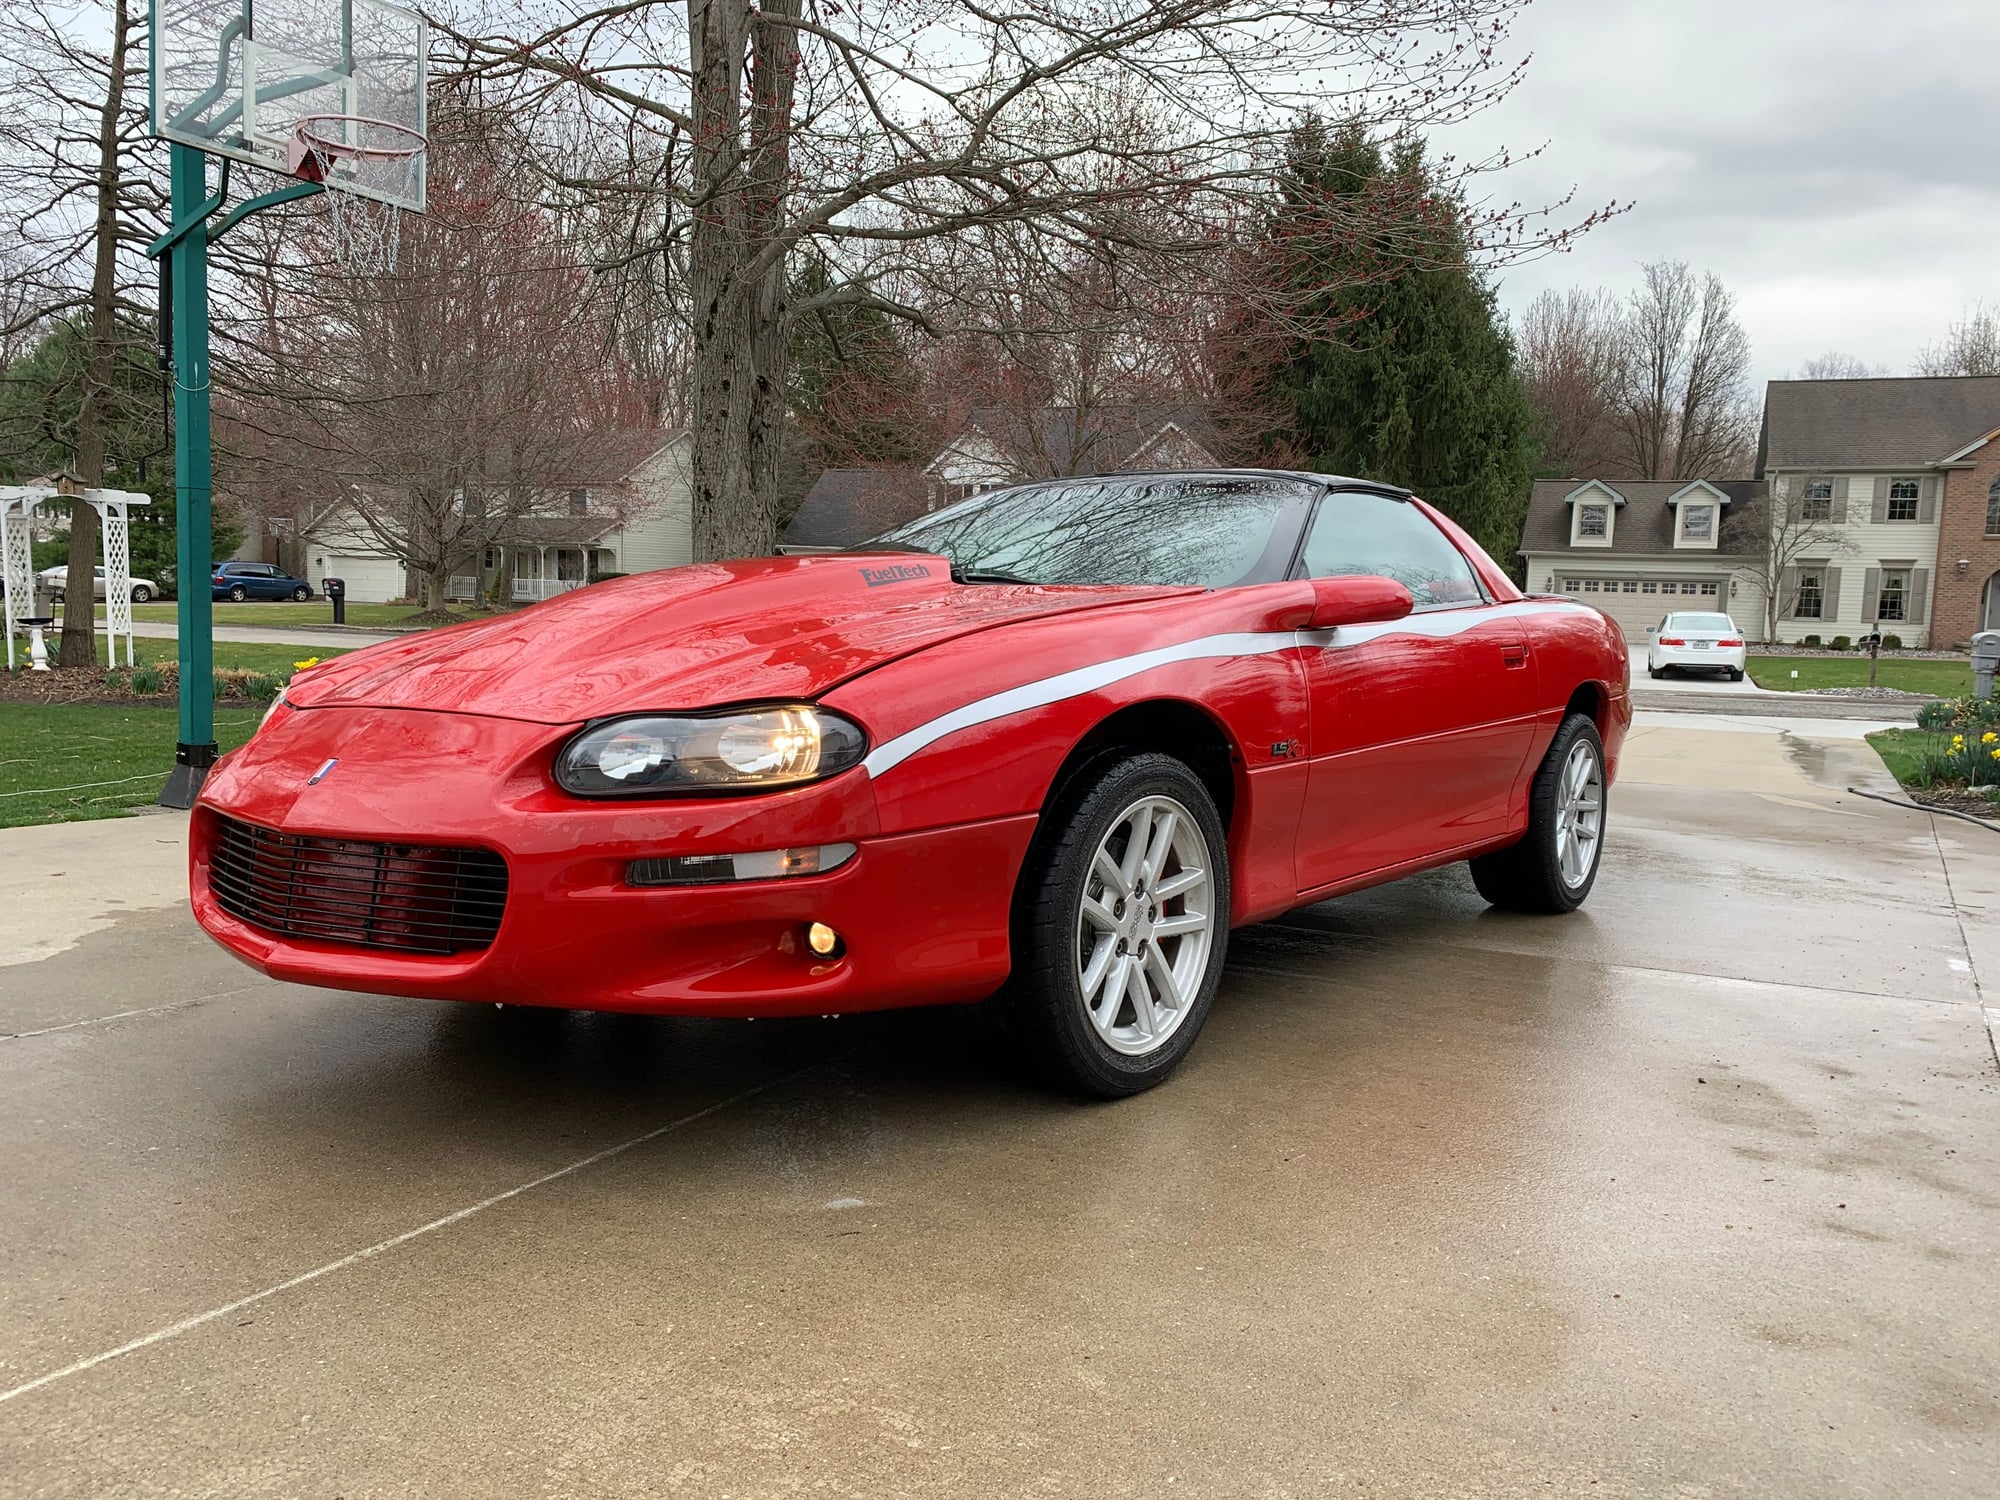 2002 Chevrolet Camaro - 2002 Z/28 6.0 swap - Used - VIN Zijegeiabebdow - 89,758 Miles - 8 cyl - 2WD - Automatic - Coupe - Red - Cortland, OH 44410, United States